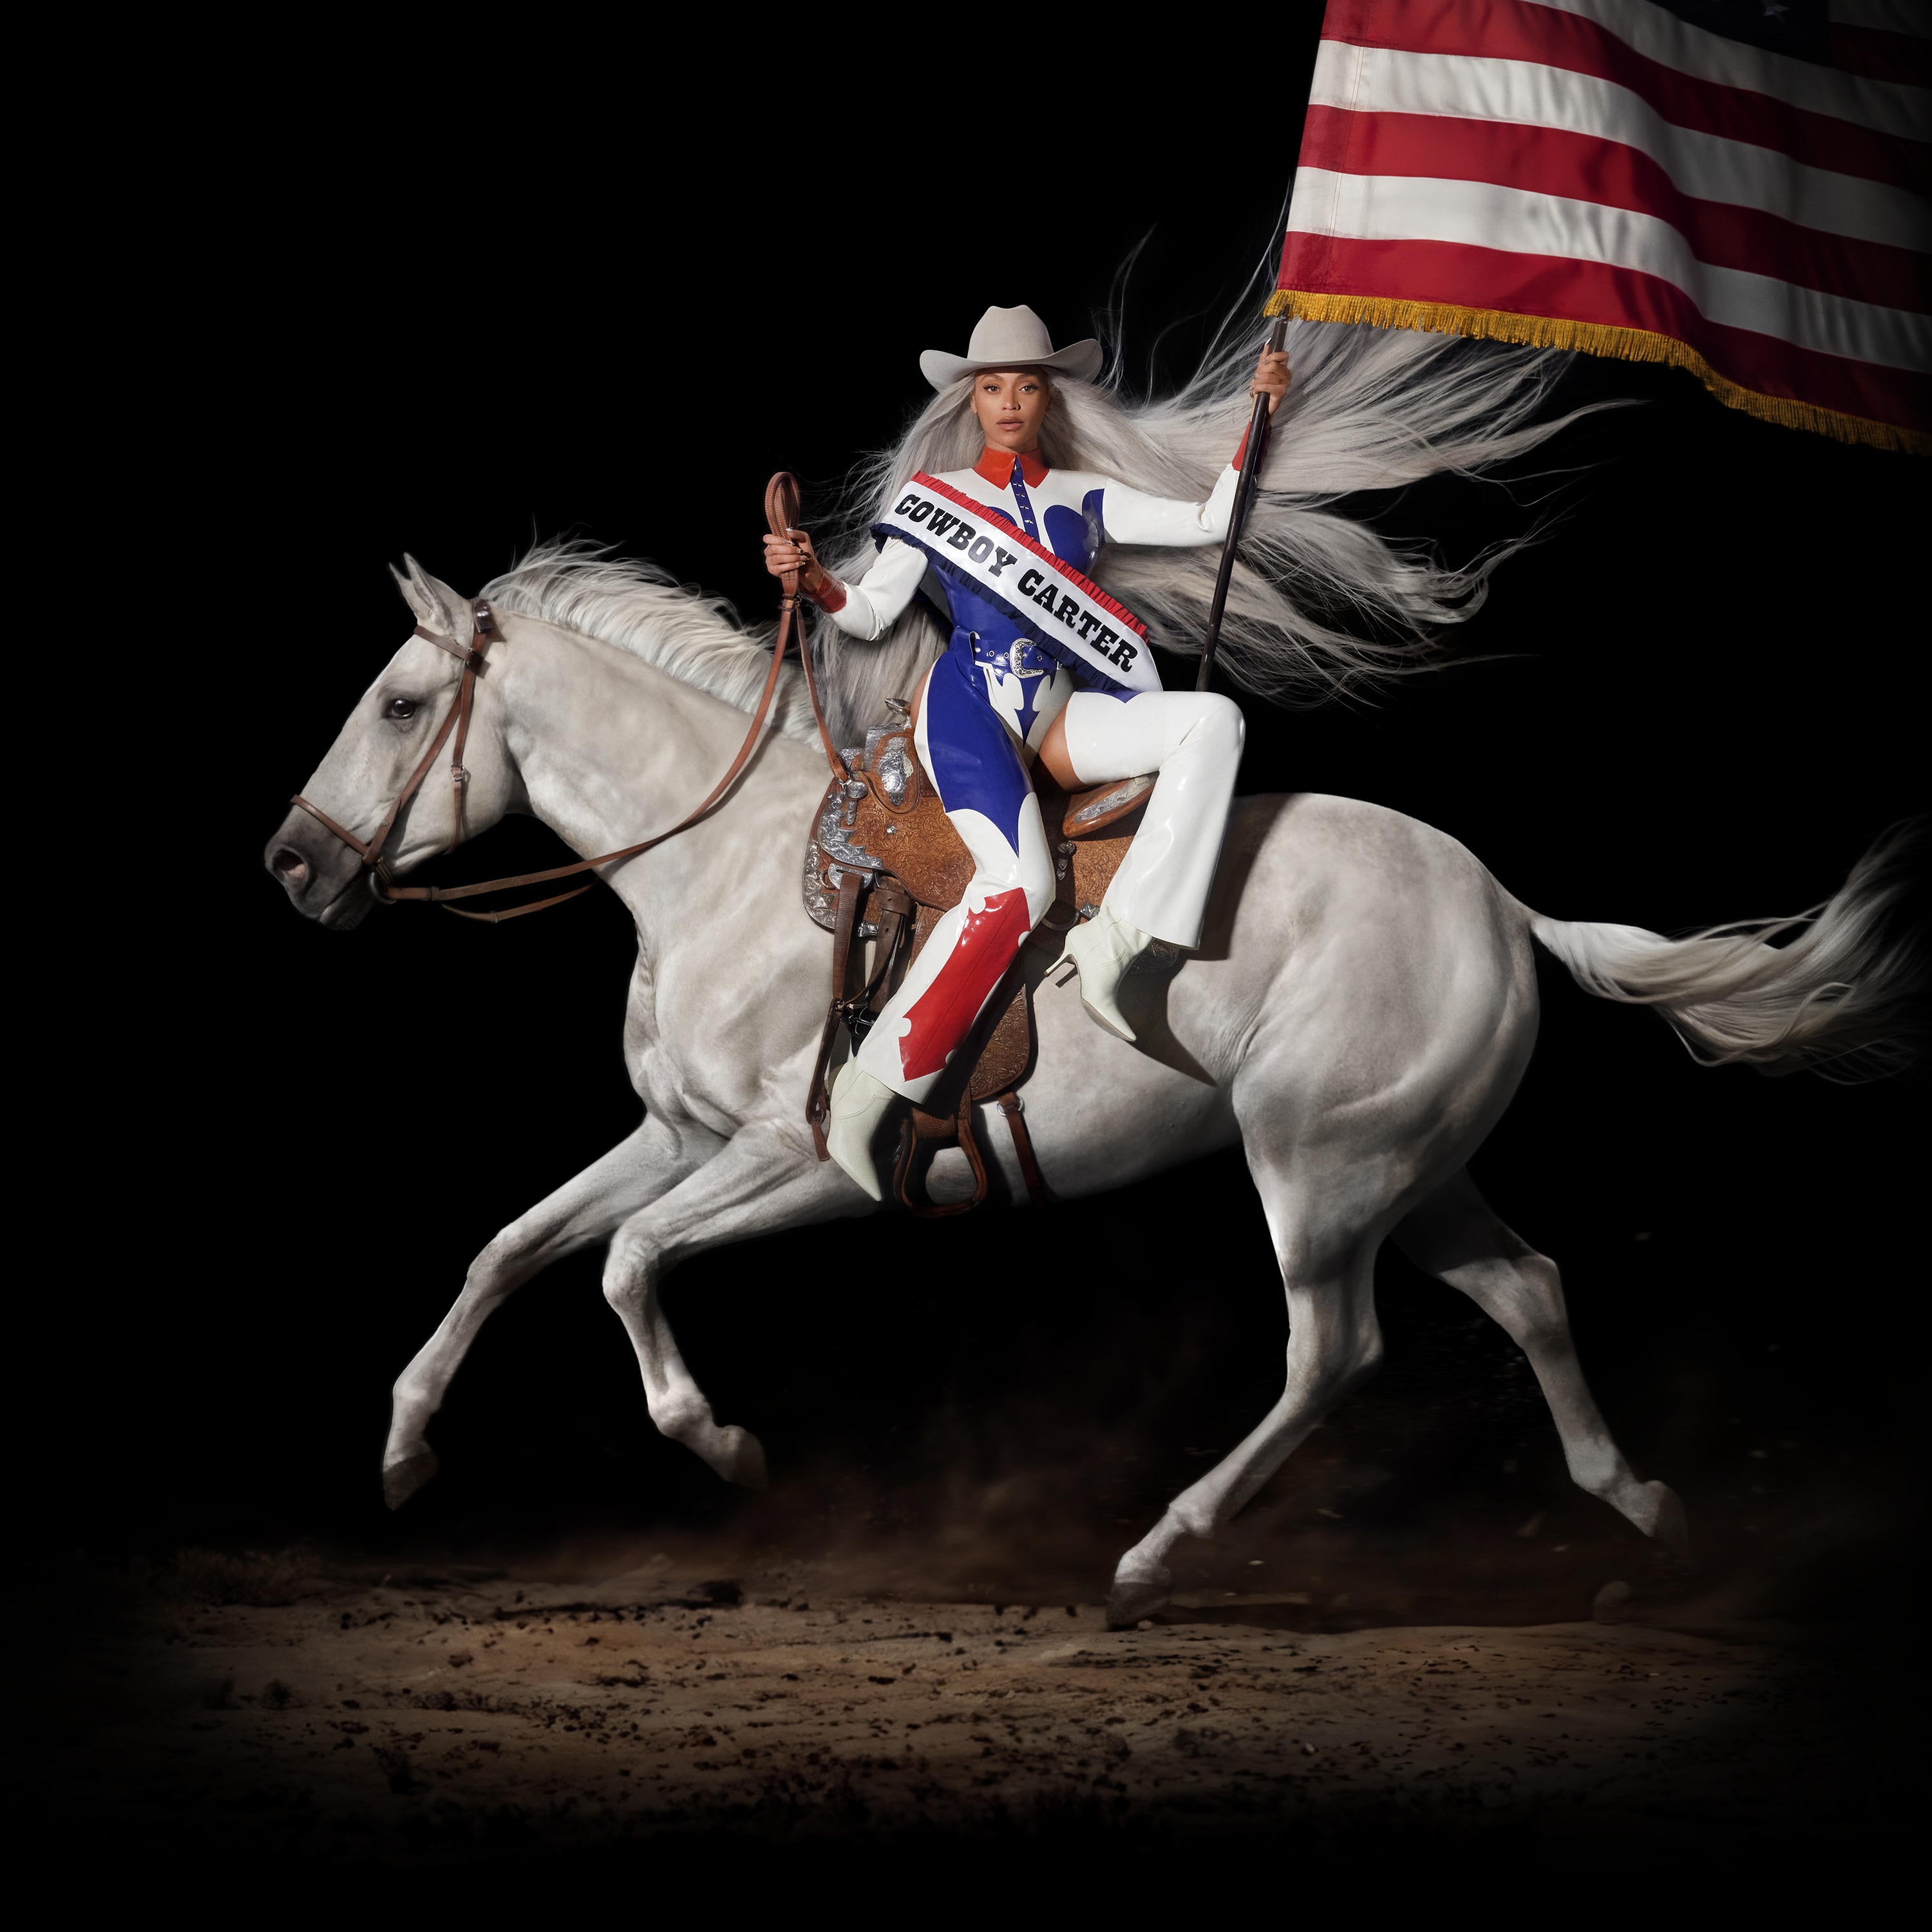 Beyoncé rides white horse in red/white/blue rodeo suit, cowboy hat, bearing a red/white flag & sash reading COWBOY CARTER